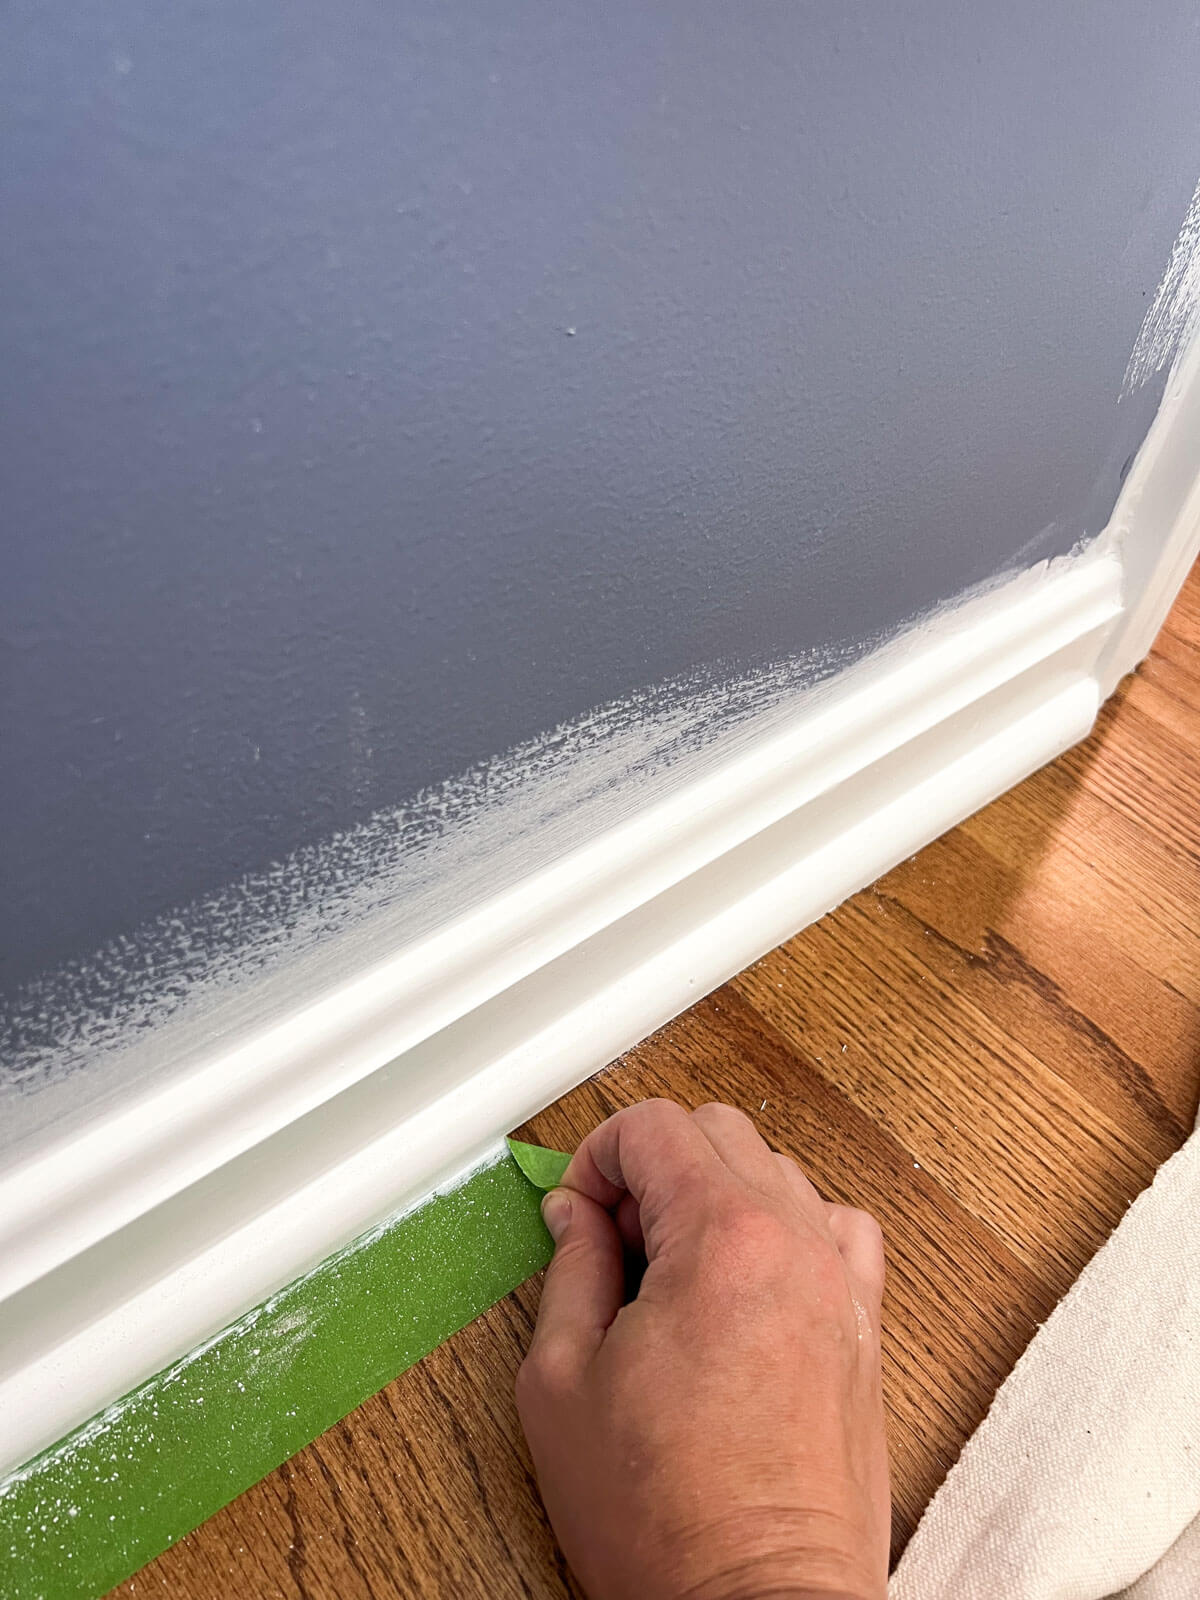 hand pulling green painter's tape away from trim.